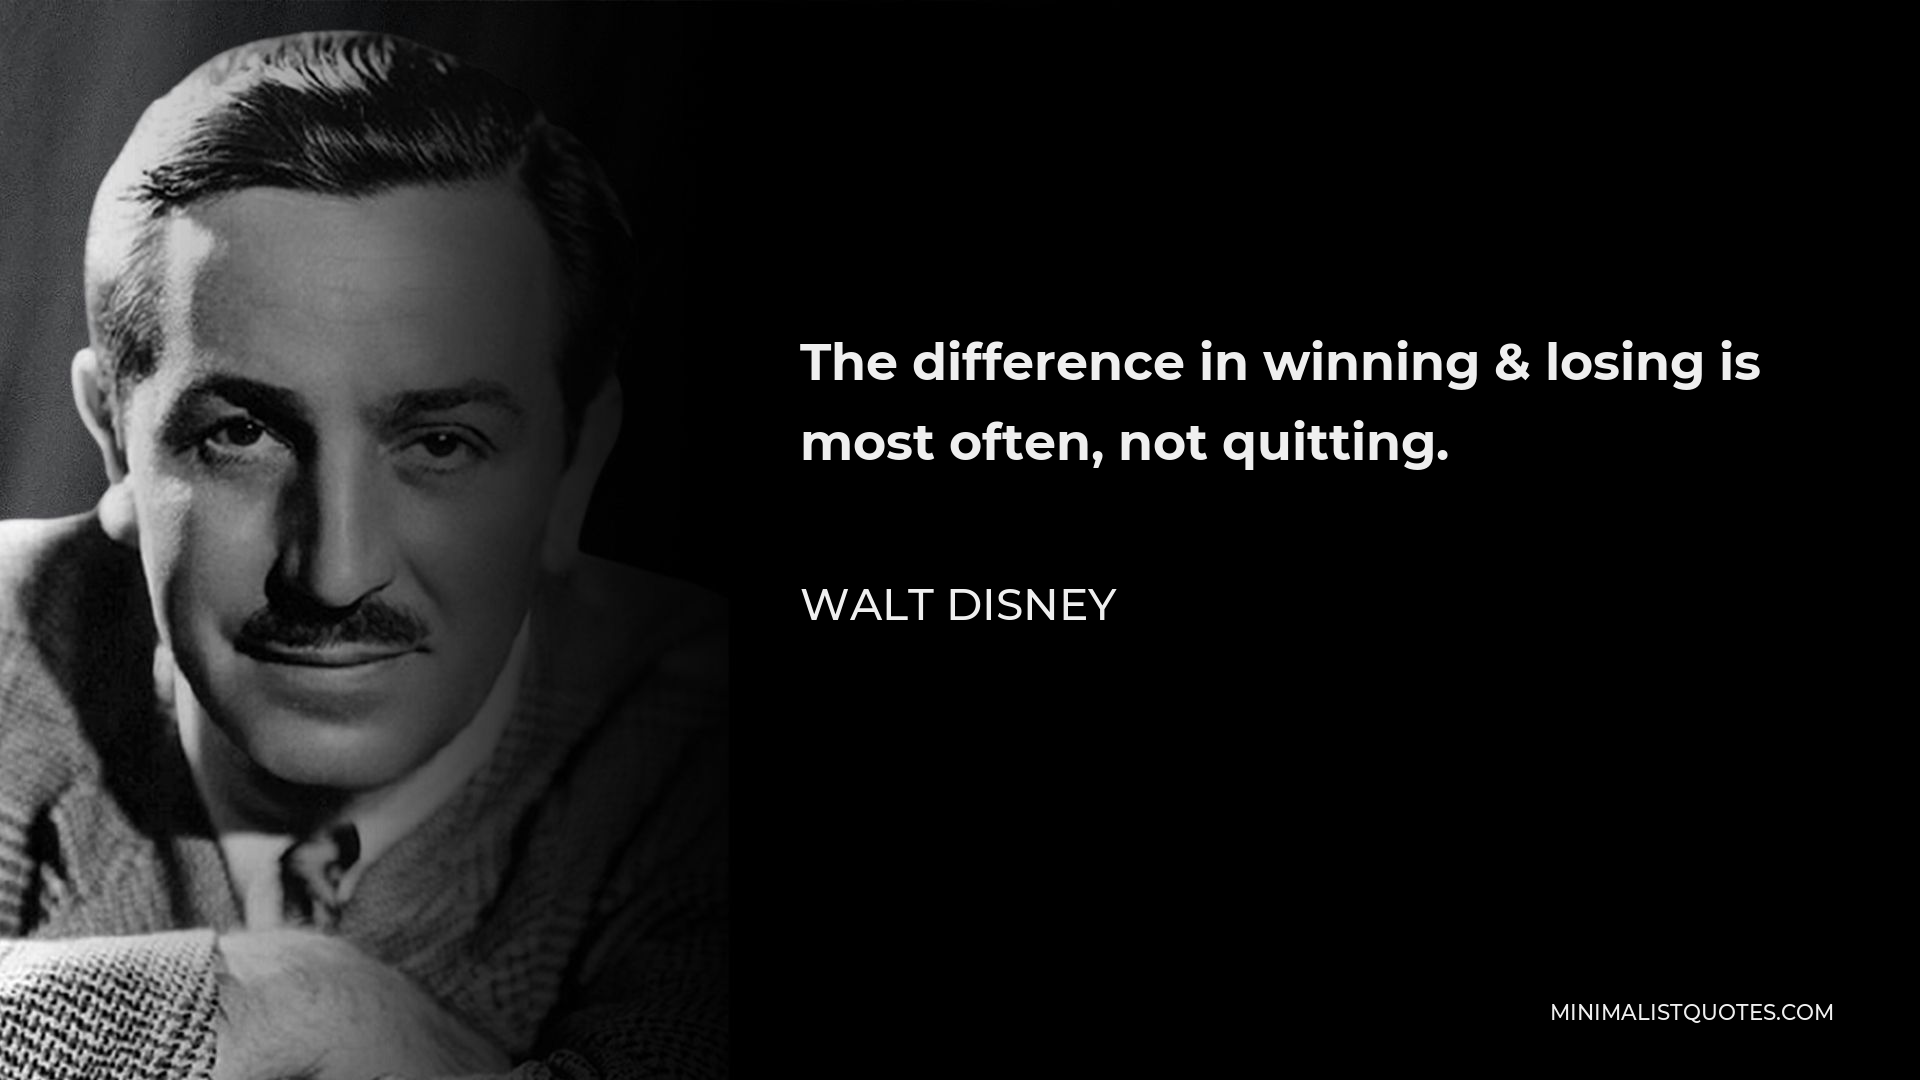 Walt Disney Quote - The difference in winning & losing is most often, not quitting.